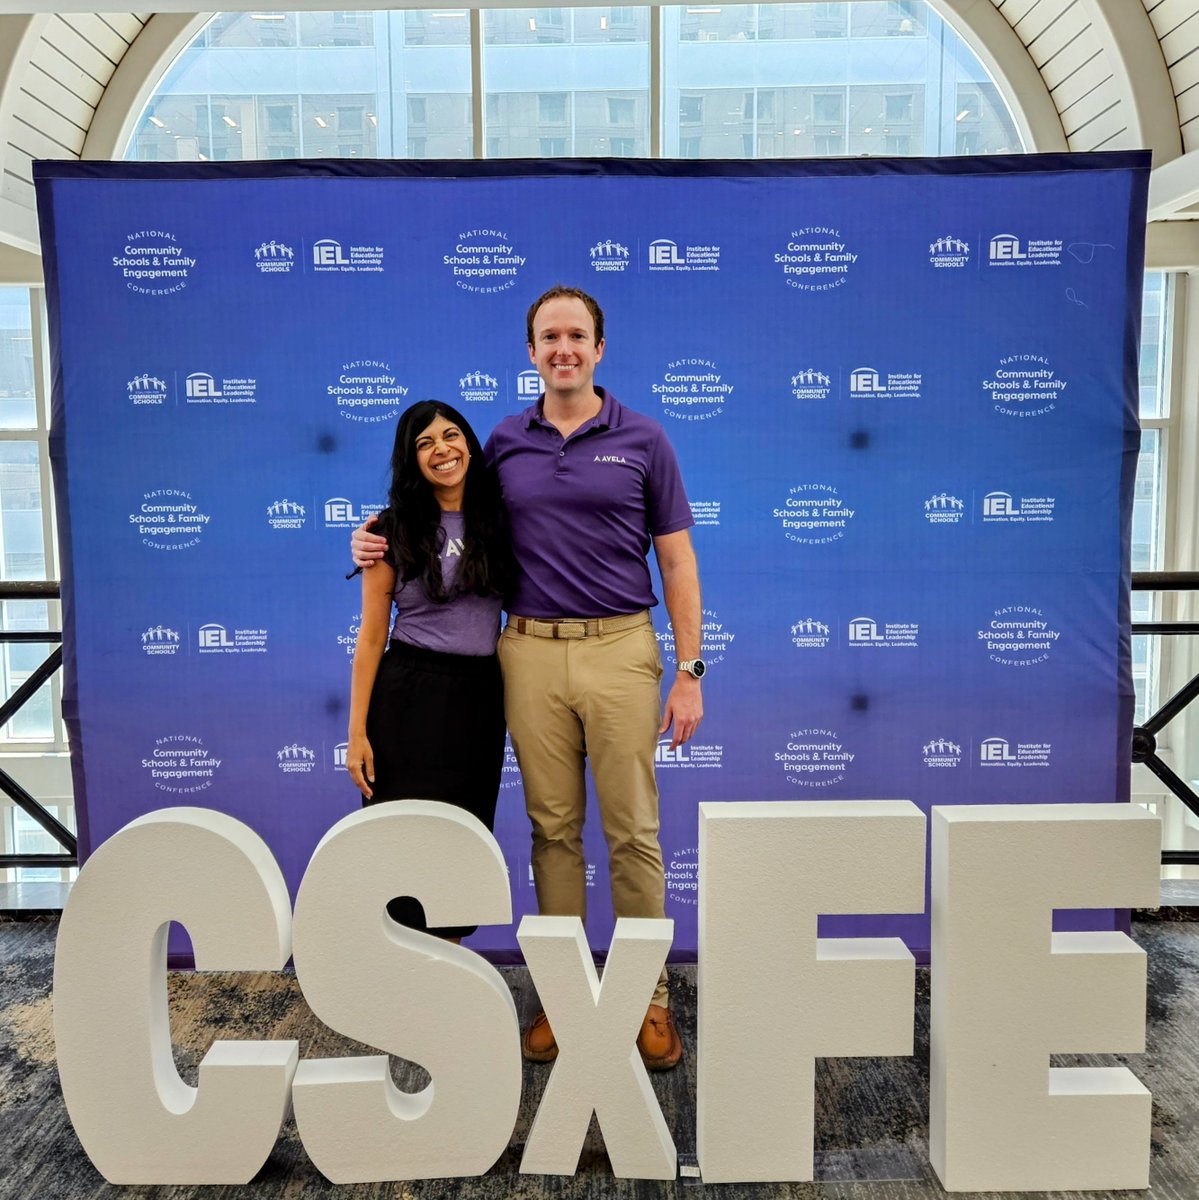 We're excited to exhibit at #CSxFE23 in Philly. Come visit @gregbybee and Sonali on the 5th Floor across from Plenary Session Grand Ballroom (Salon H).